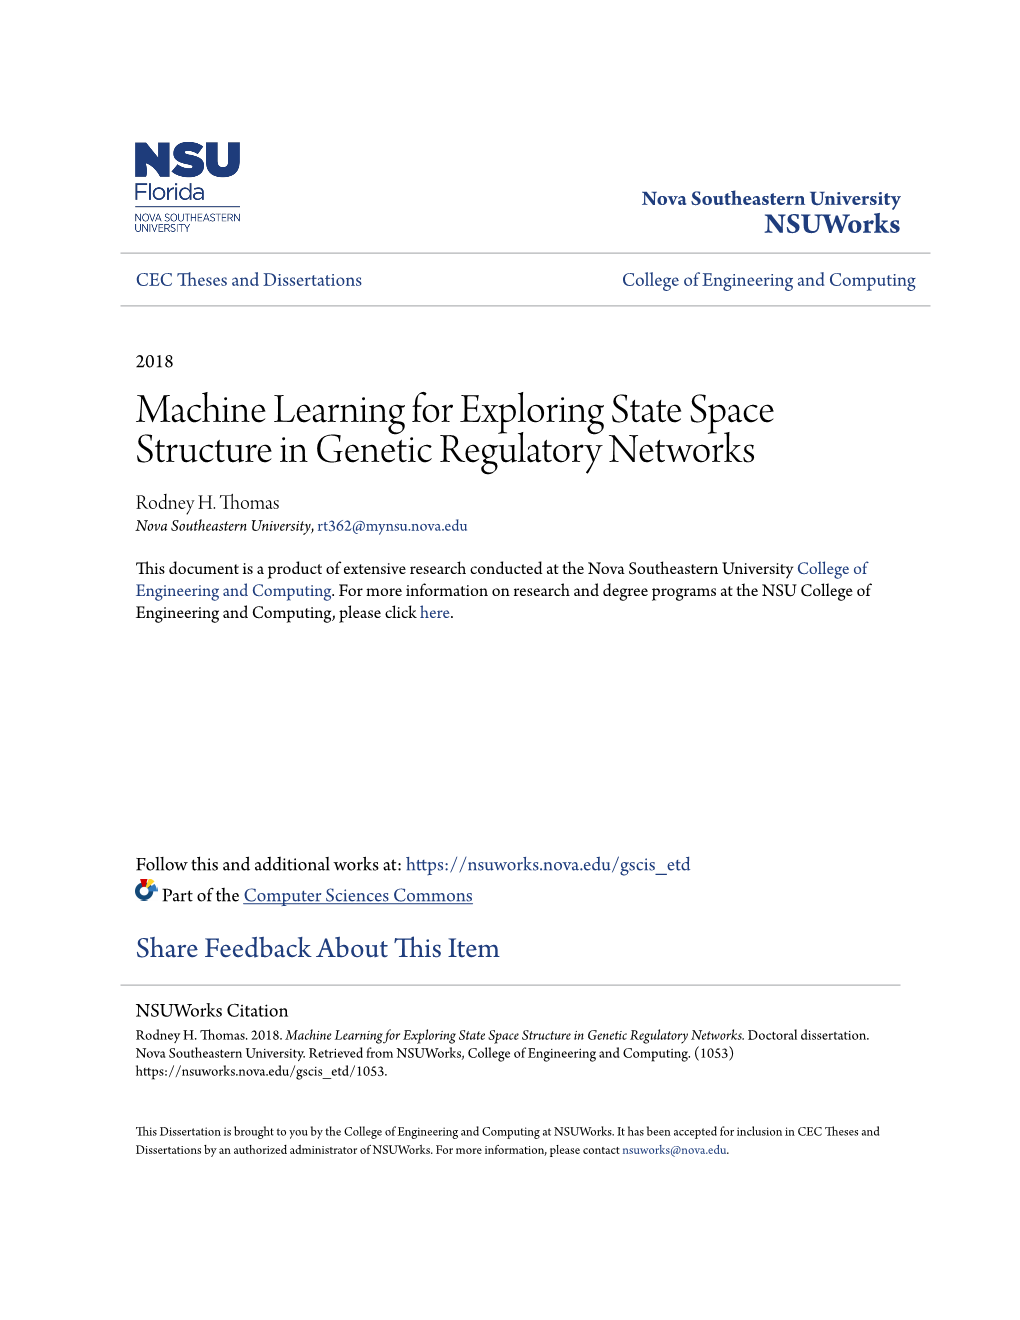 Machine Learning for Exploring State Space Structure in Genetic Regulatory Networks Rodney H